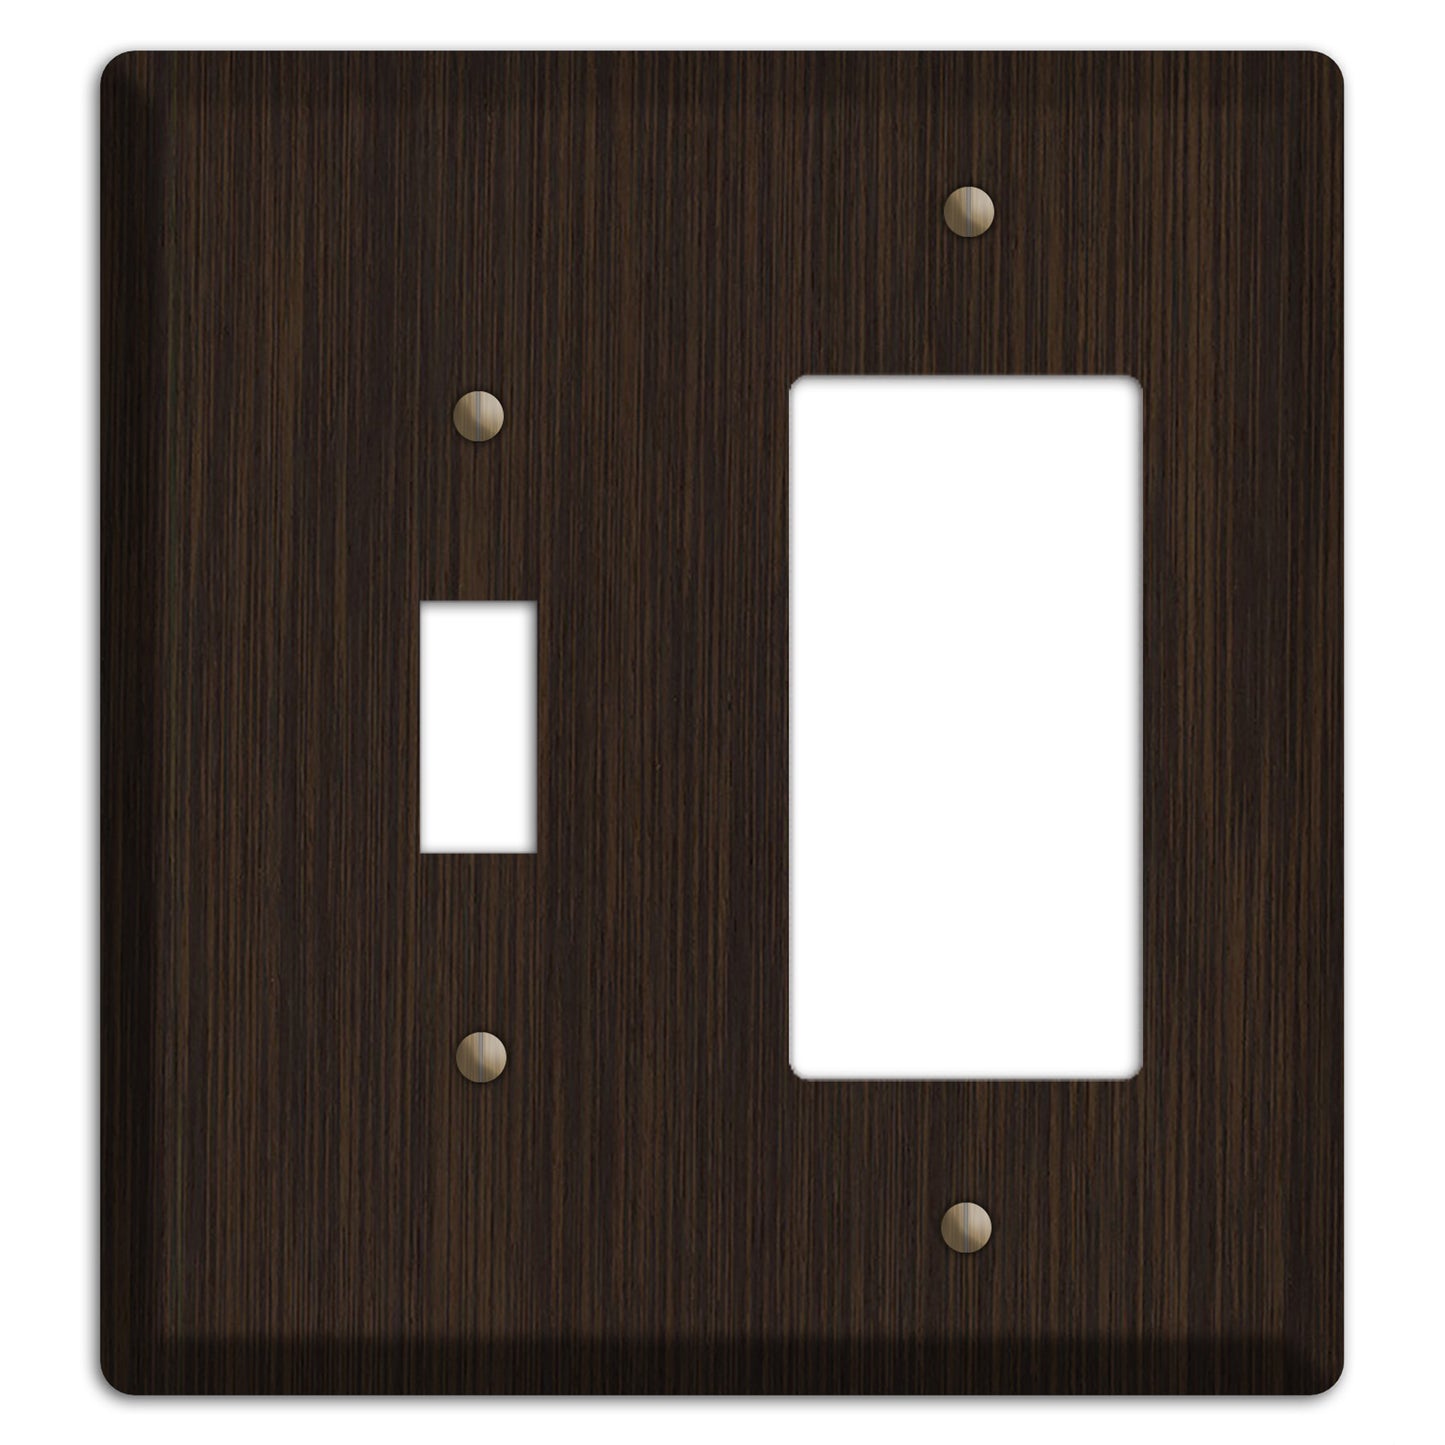 Wenge Wood Toggle / Rocker Cover Plate